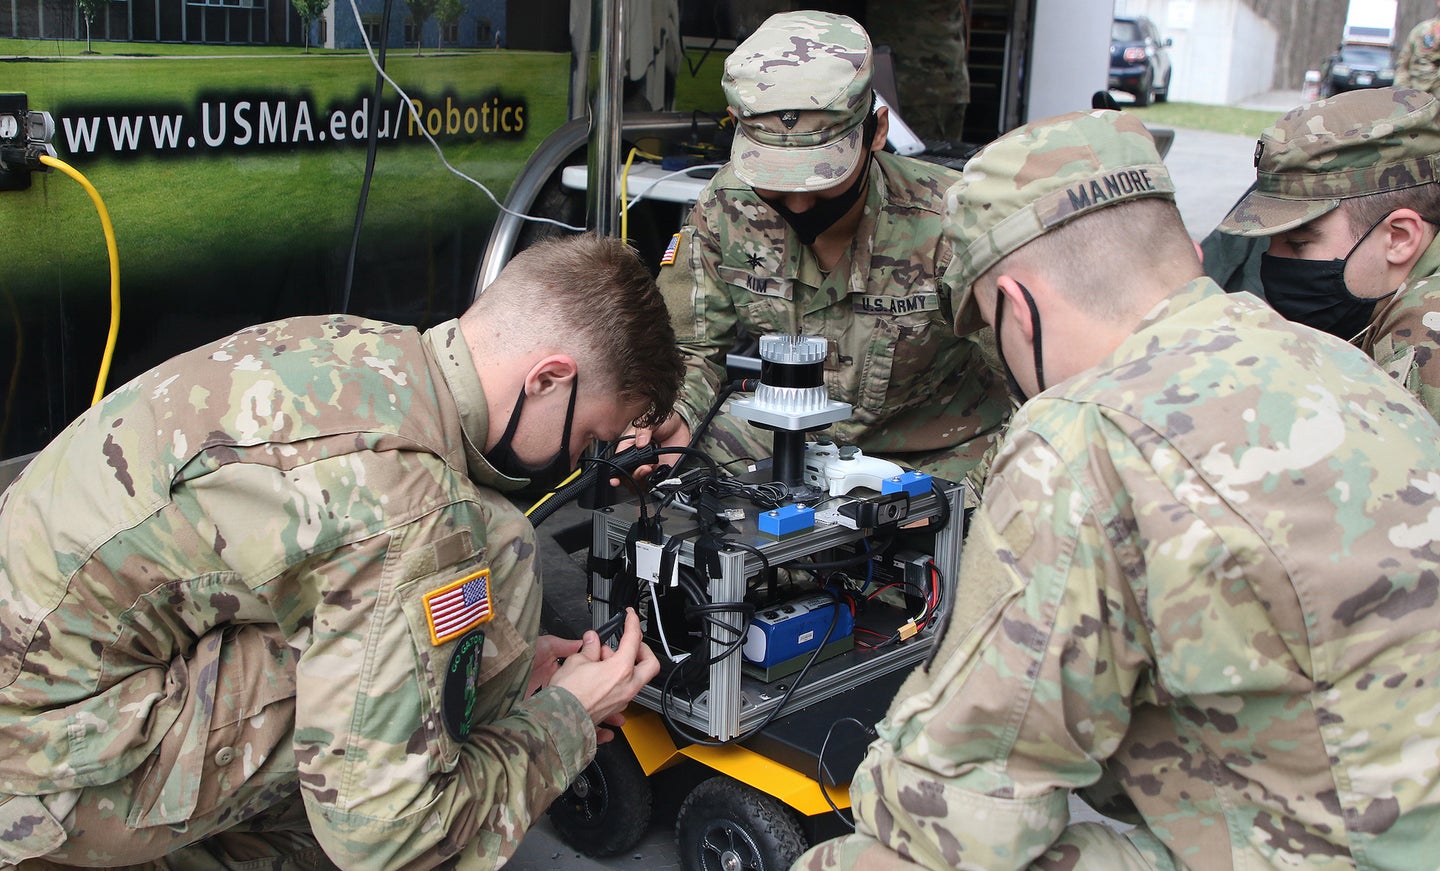 Soldiers work on a robot